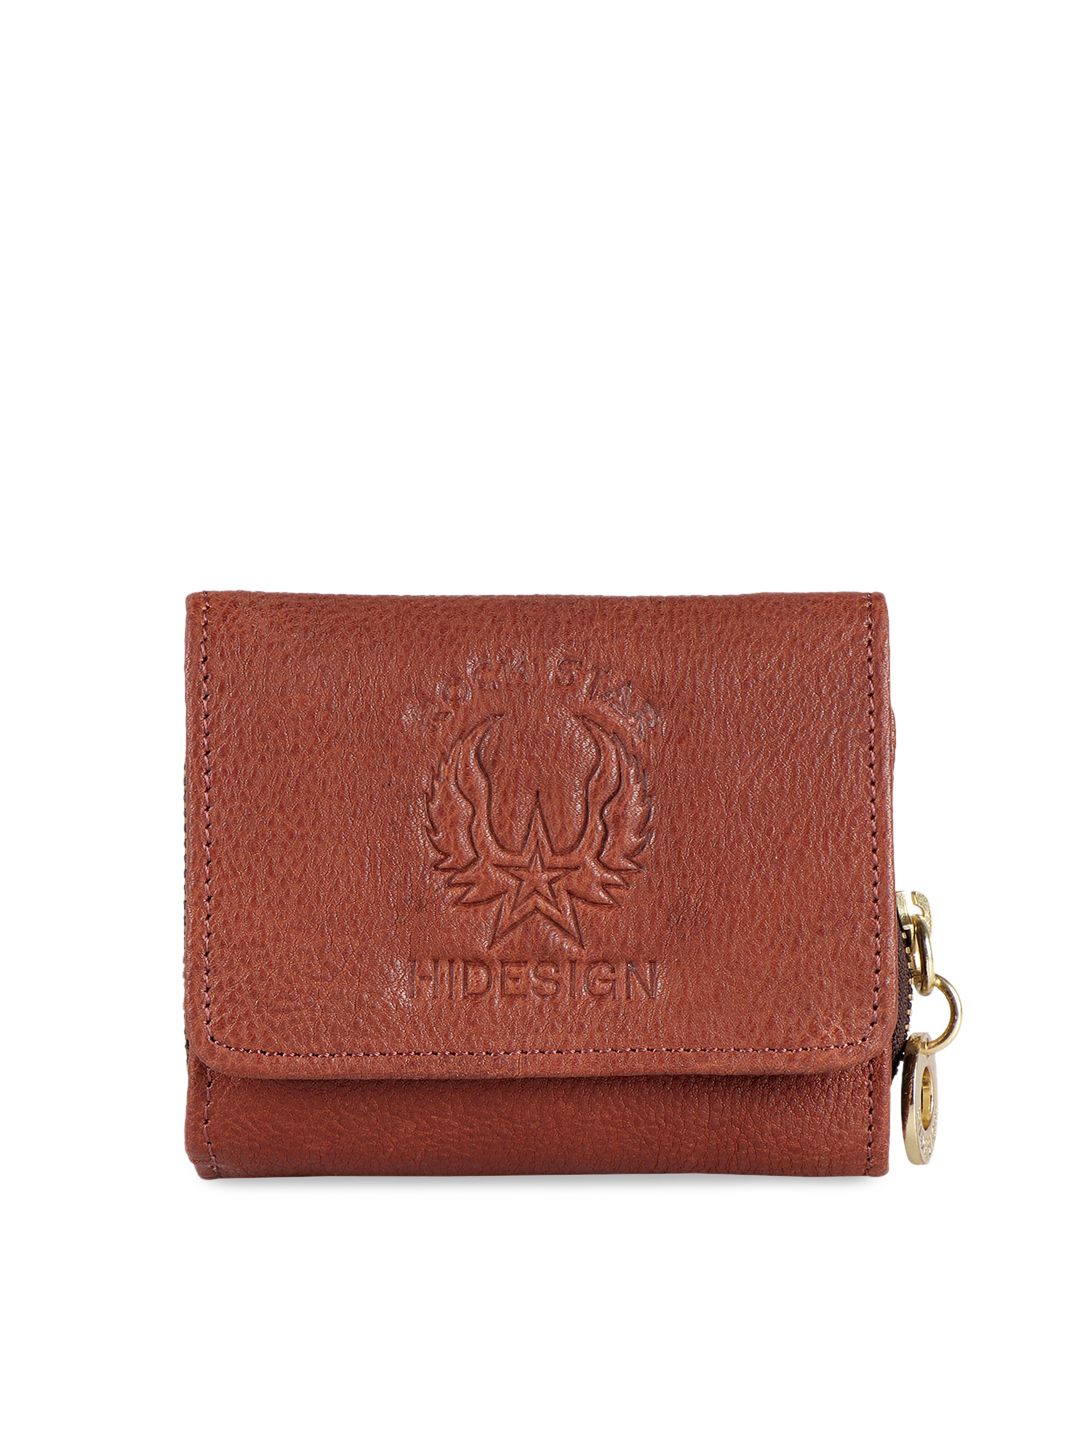 Hidesign Women Brown Solid Three Fold Leather Wallet Price in India